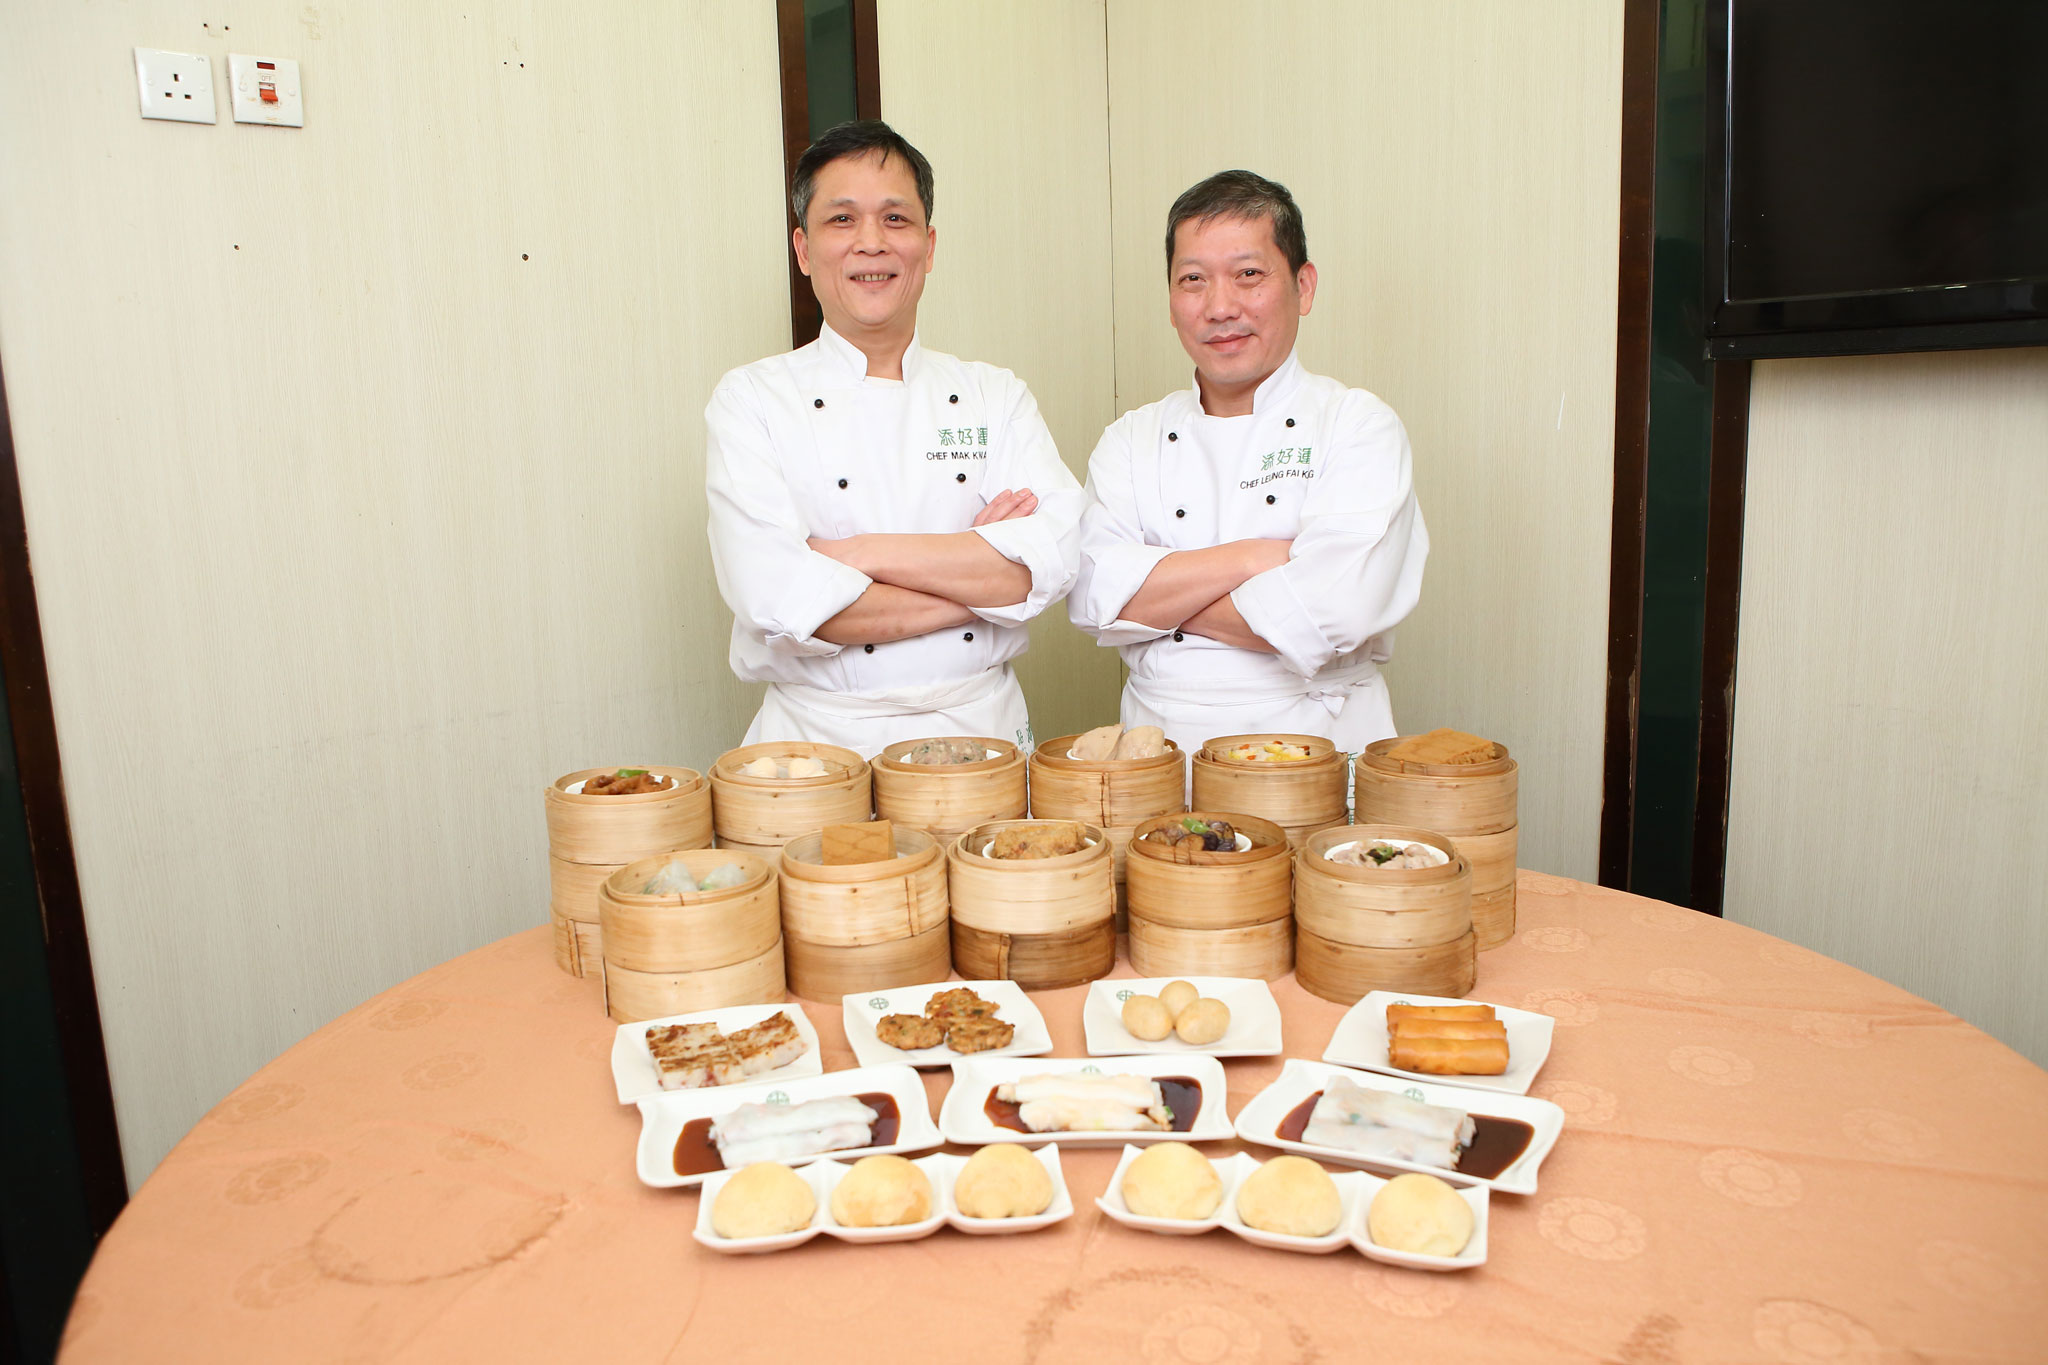 Tim Ho Wan - Picture of Chefs and Dim sum.